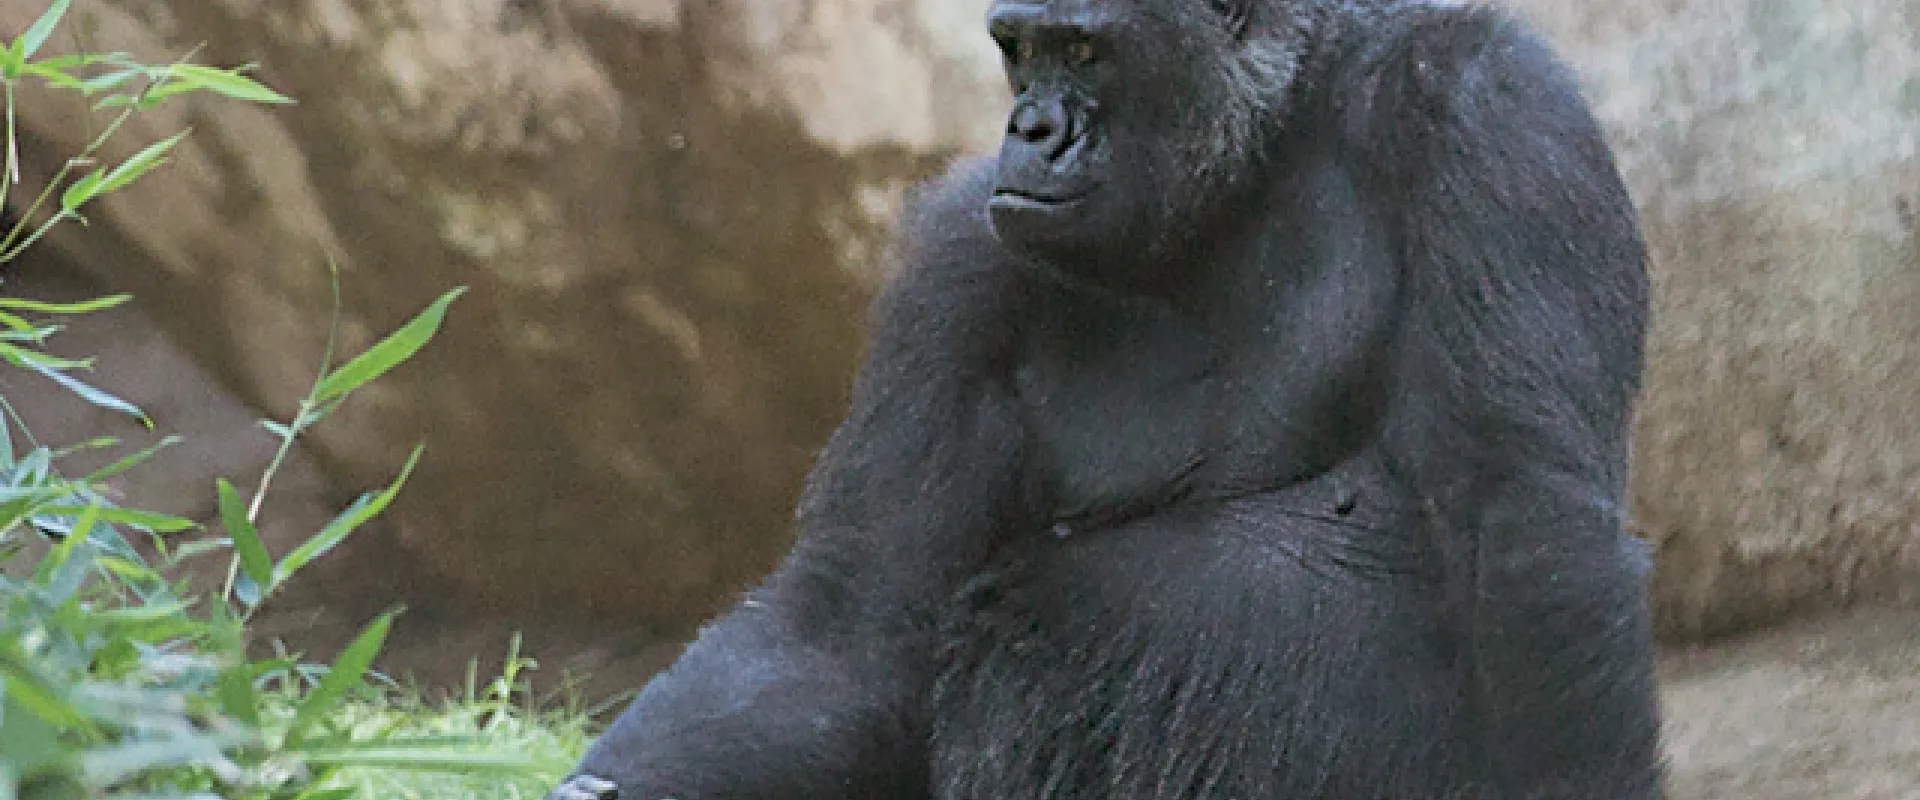 North Carolina Zoo Mourns the Passing of Rosie, the Matriarch of the Zoo’s Gorilla Troop